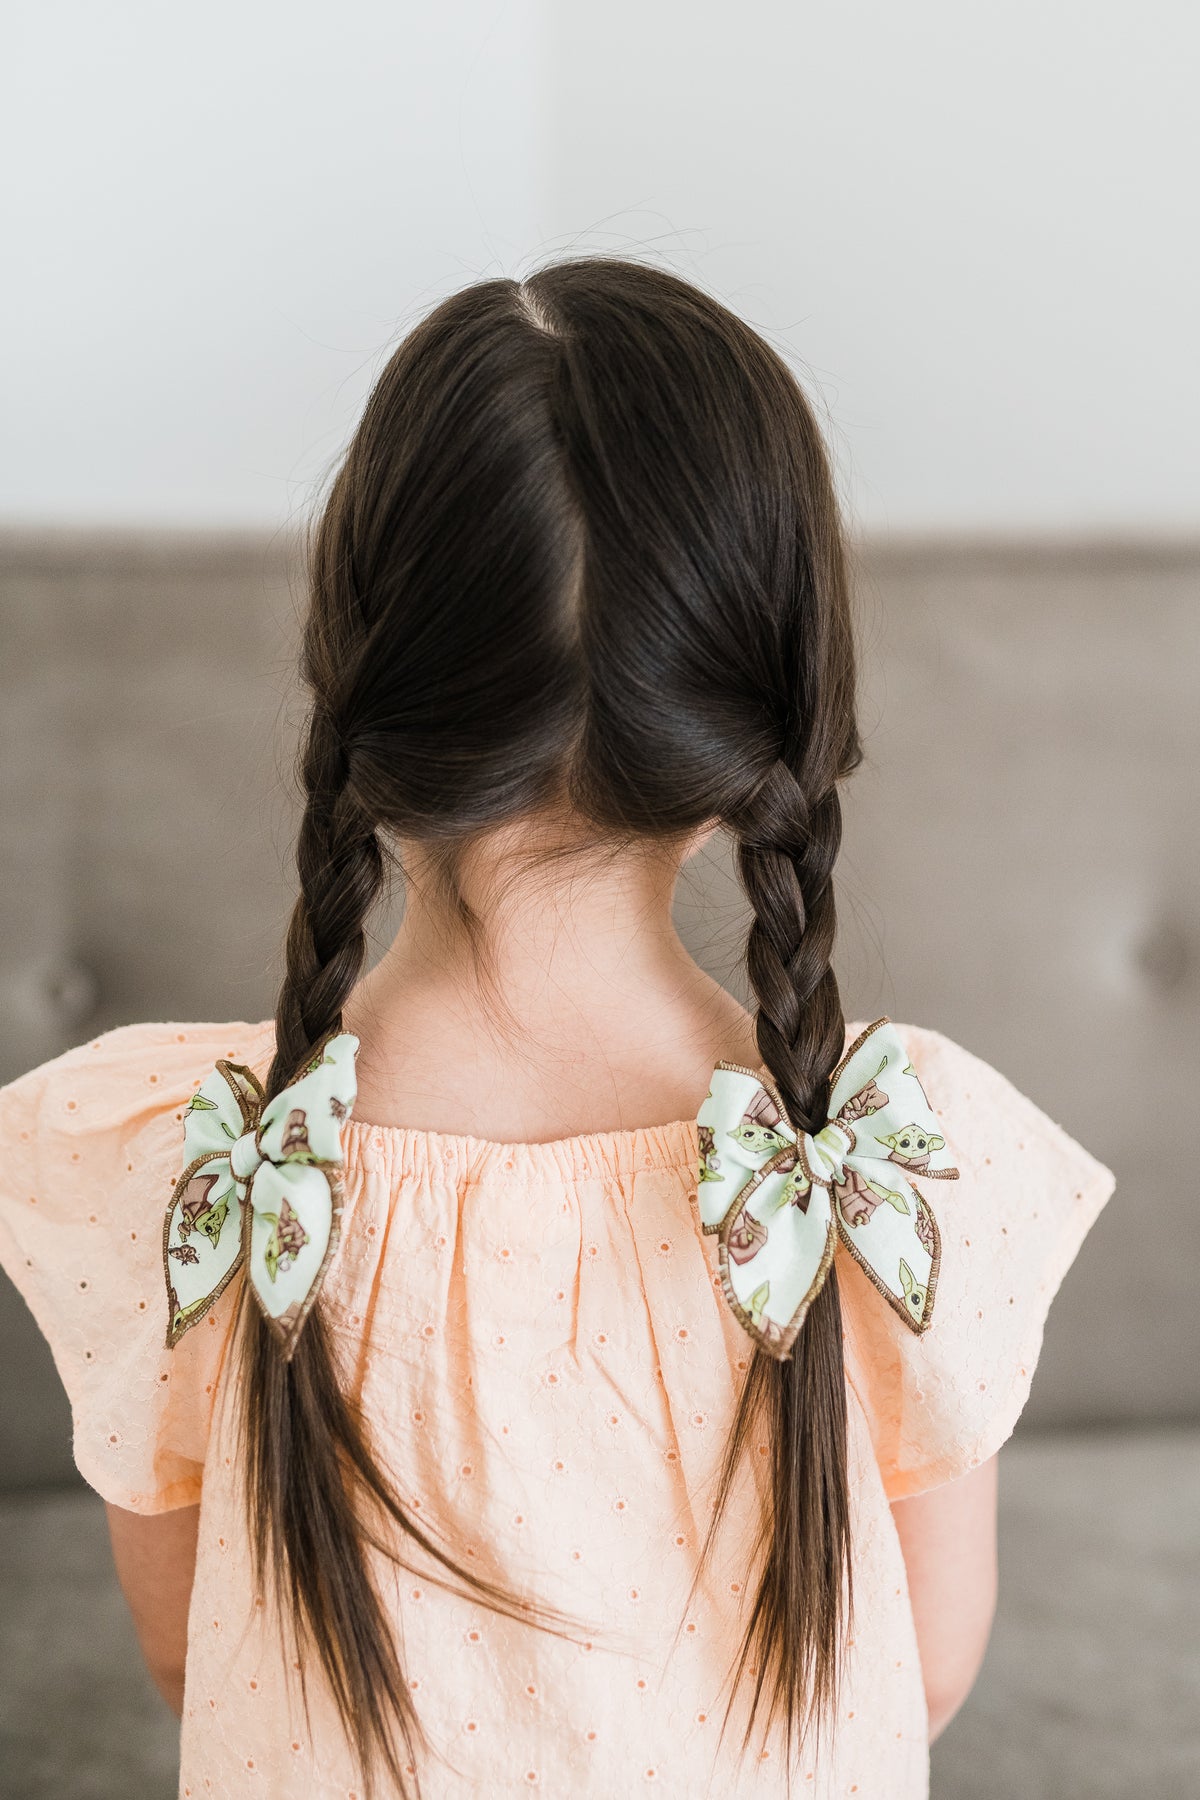 The Child Whimsy Pigtail Set | Happiest Place Collection